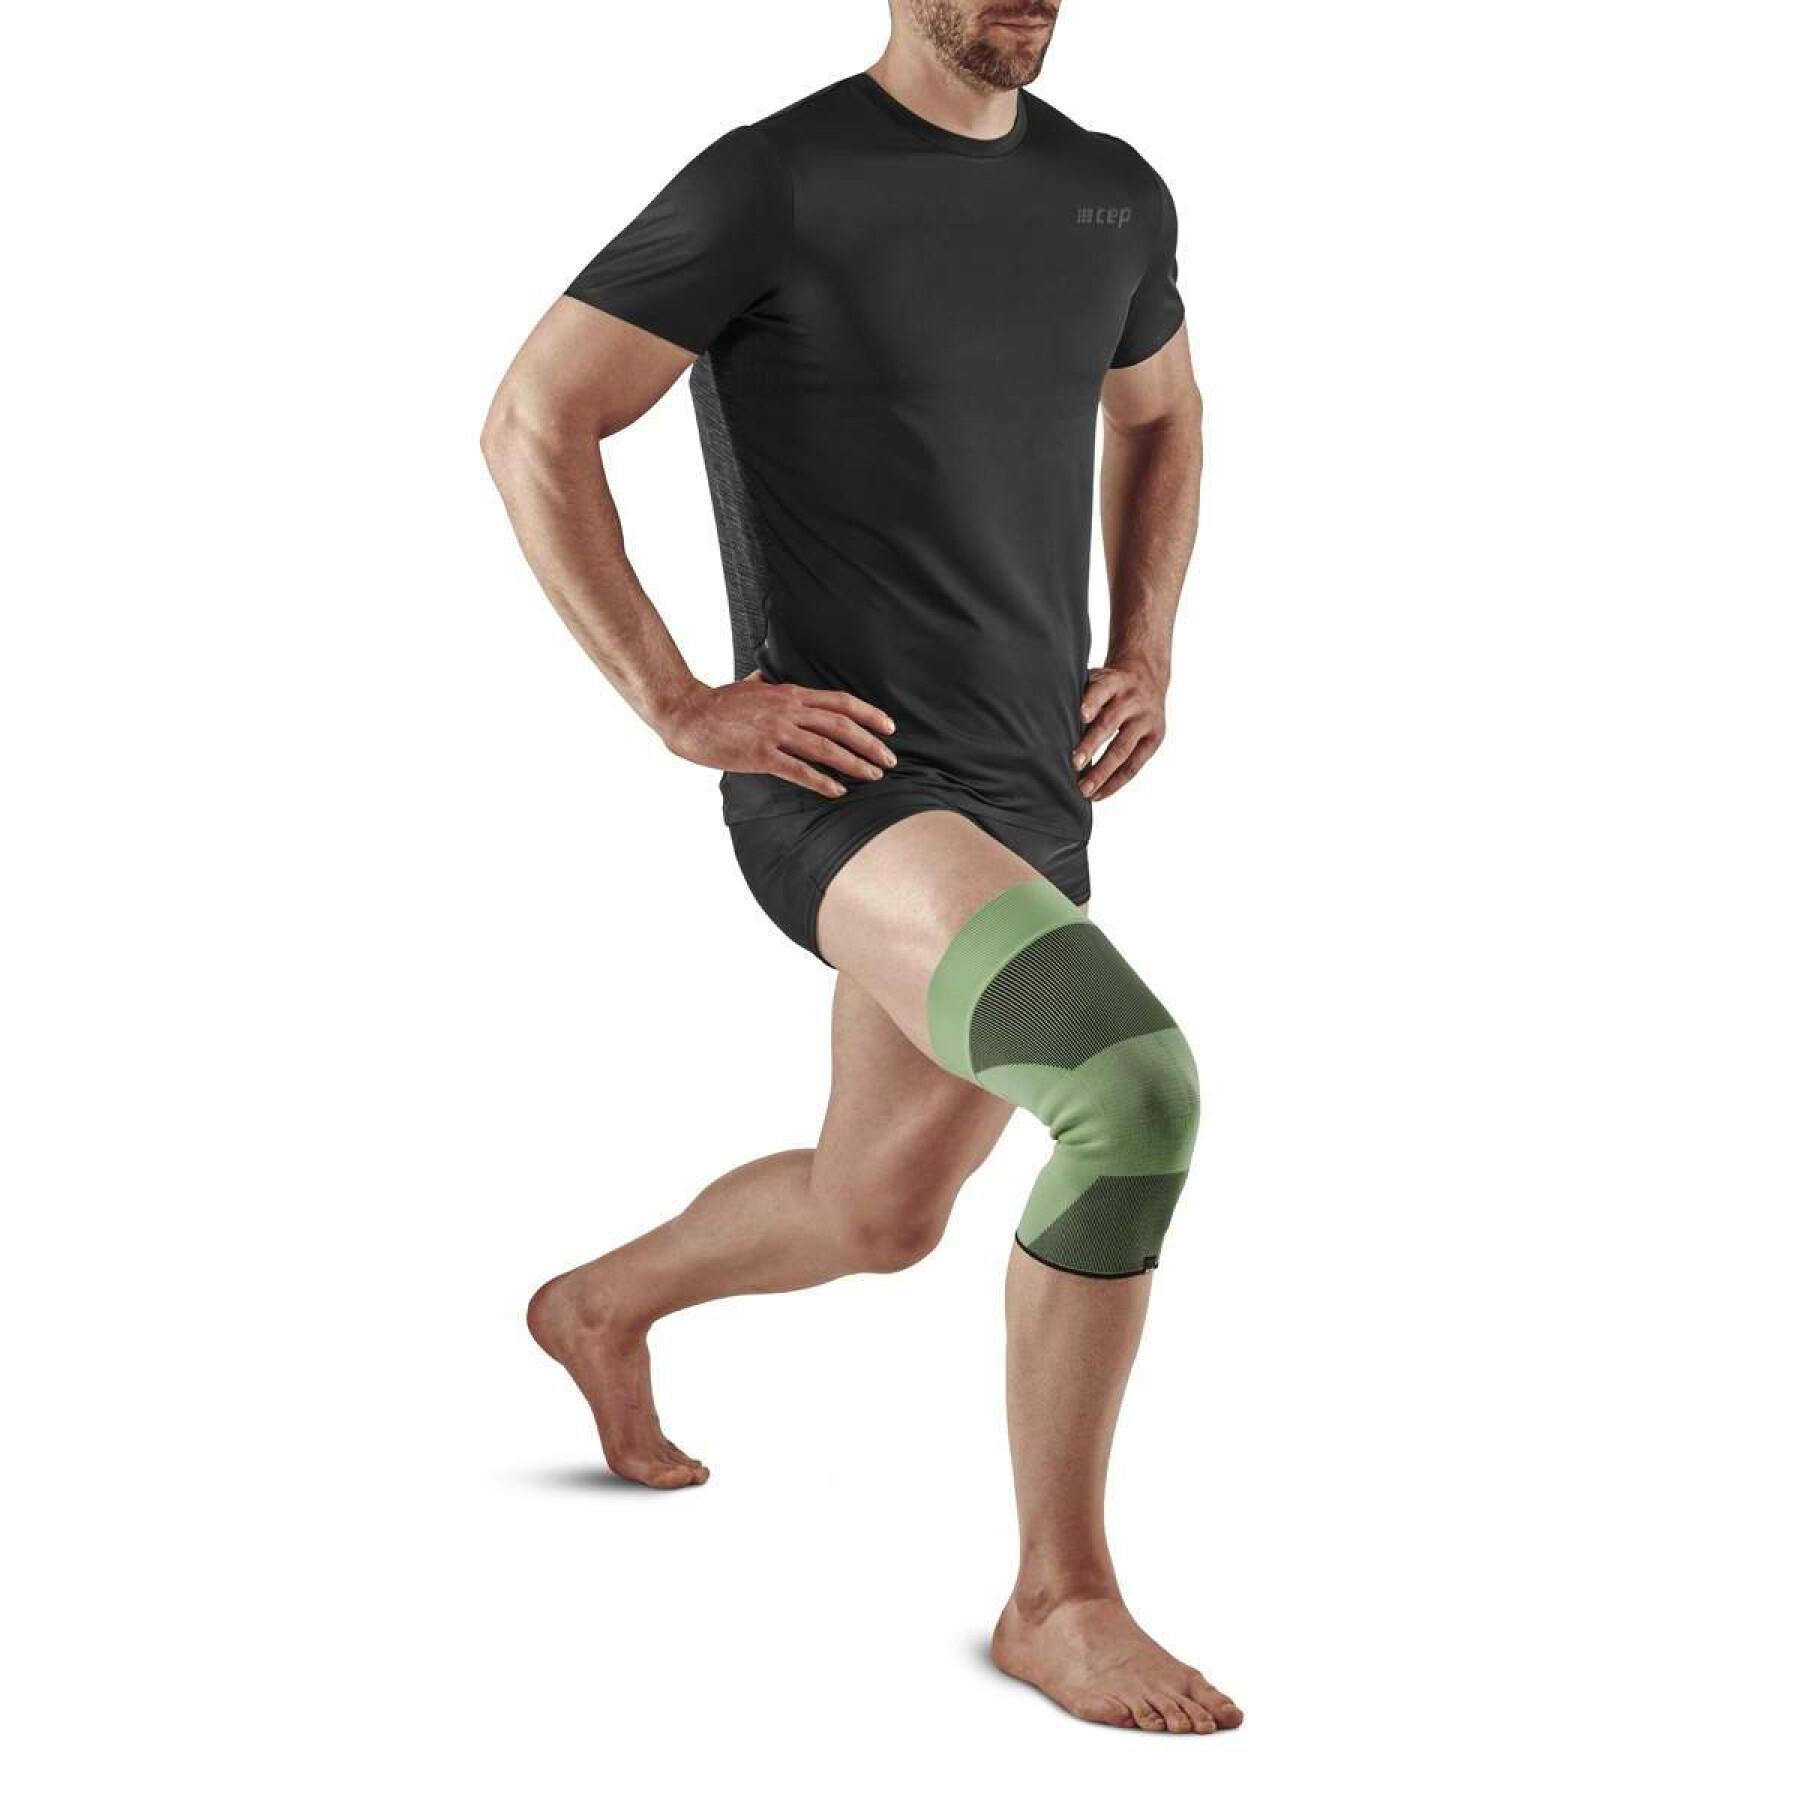 Intermediate knee support CEP Compression - Knee pads